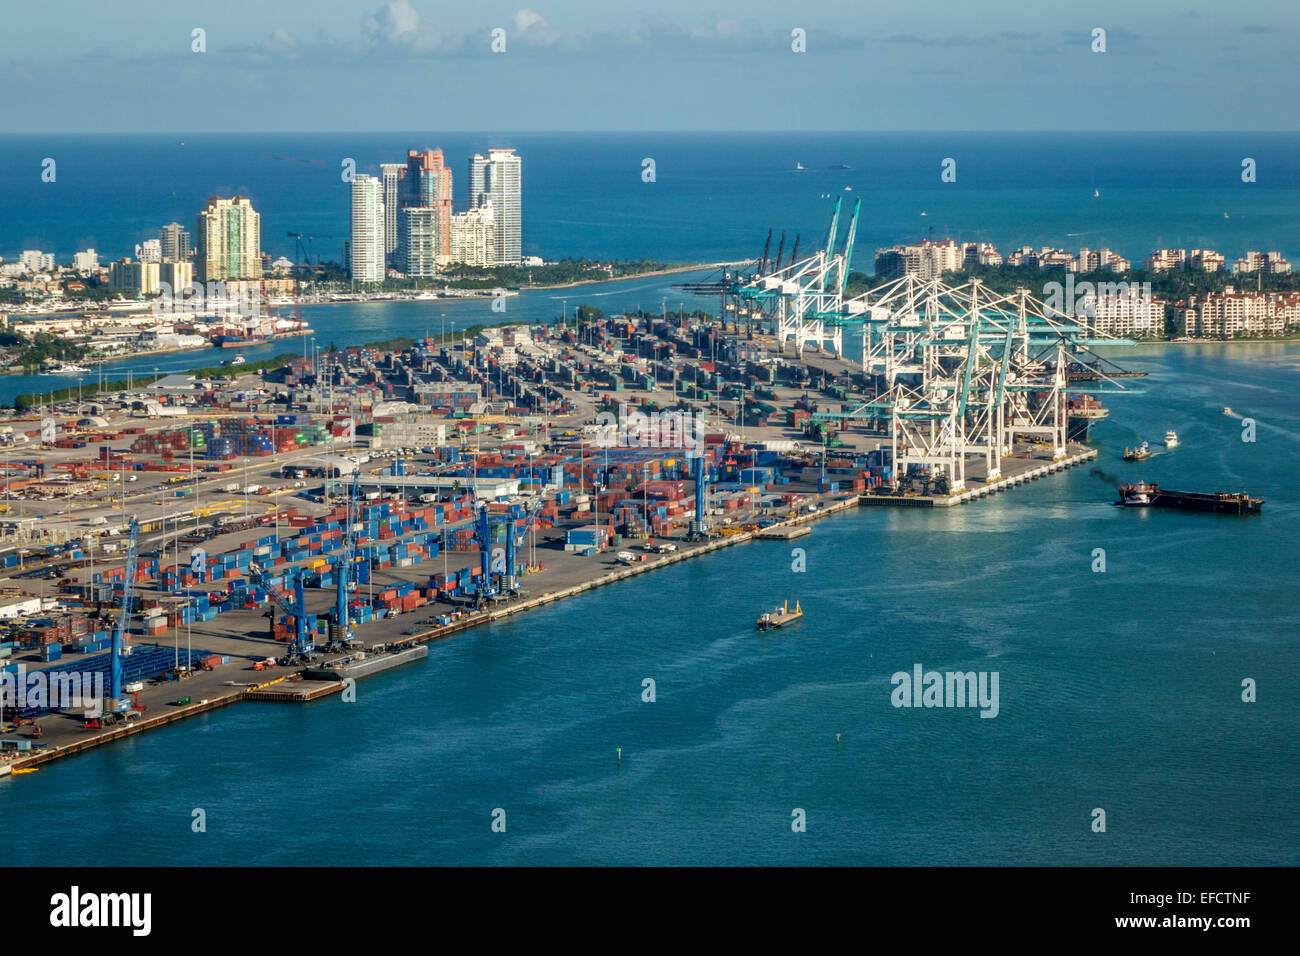 Miami Florida,Port,Biscayne Bay,Miami Beach,Atlantic Ocean,aerial overhead view from above,Fisher Island,view through window,FL150106005 Stock Photo